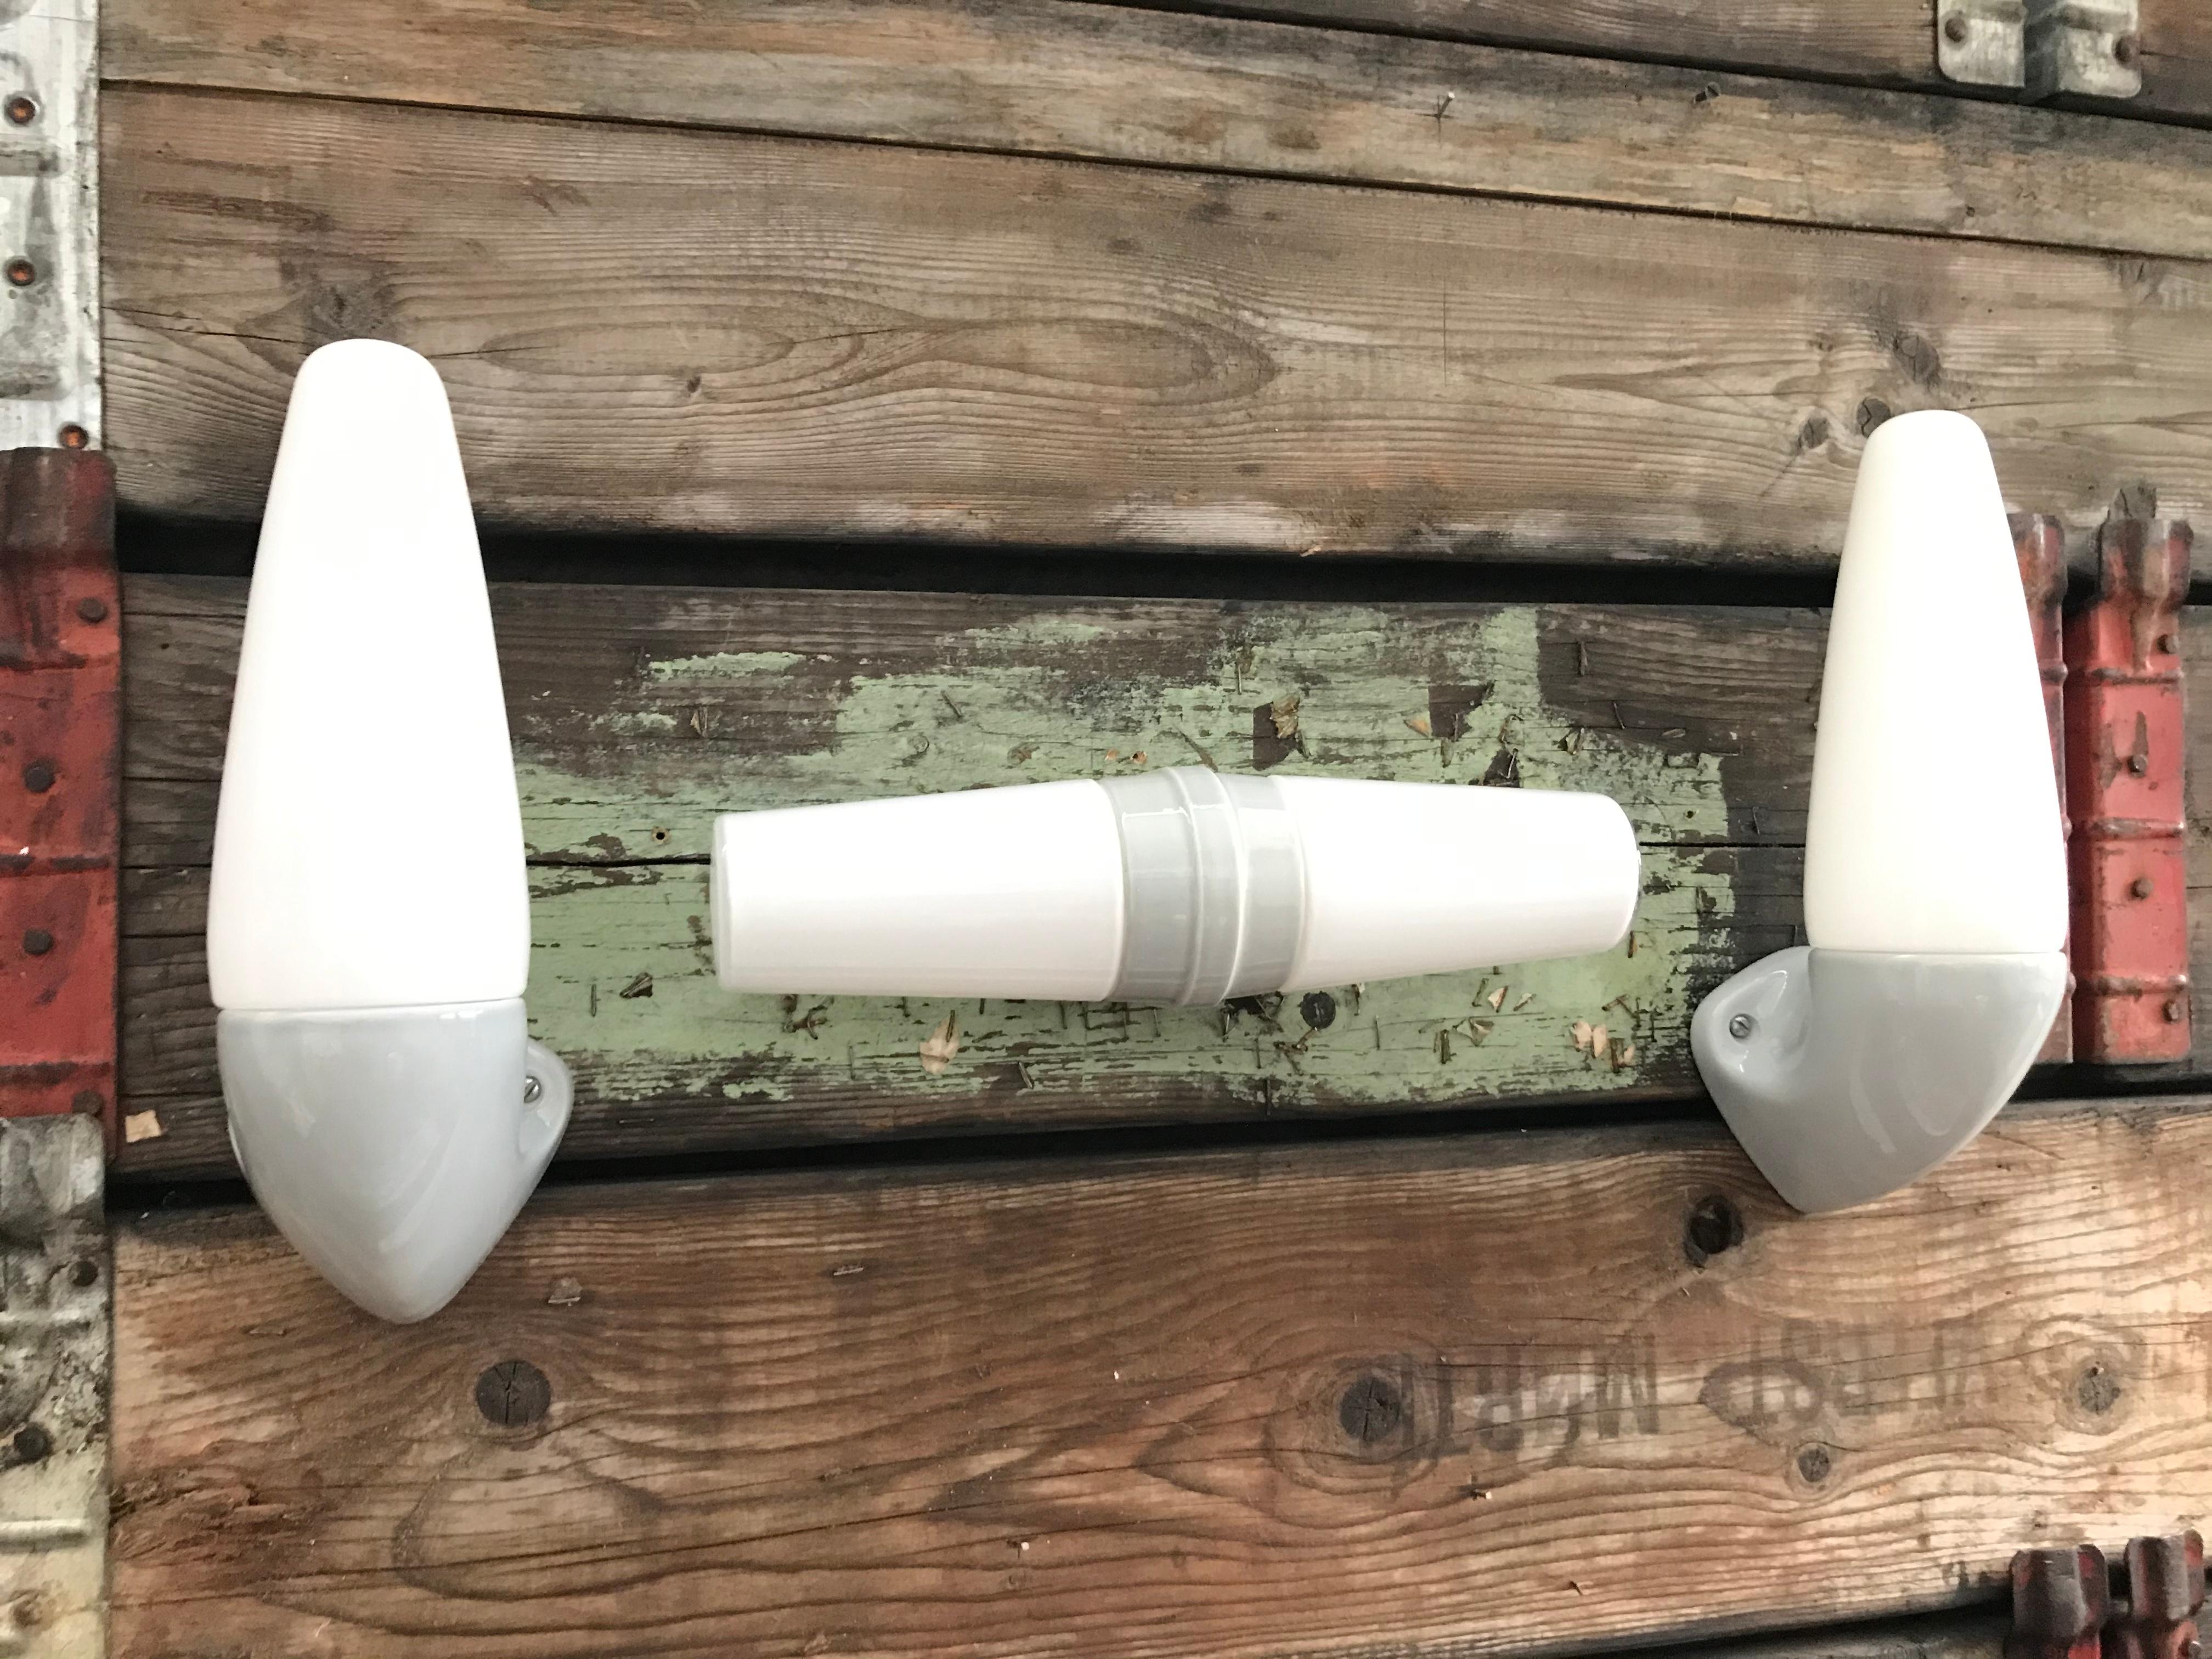 A set 3 vintage Ifö of Sweden ceramic bathroom lamps model 6035 and 6060 from the 1960s in grey.
Designed by Sigvard Bernadotte. 
Opaline glass shades. 
Ceramic bulb holders for an E15 bulb
Lamps can be used as up or down lights.
A set of 3 is